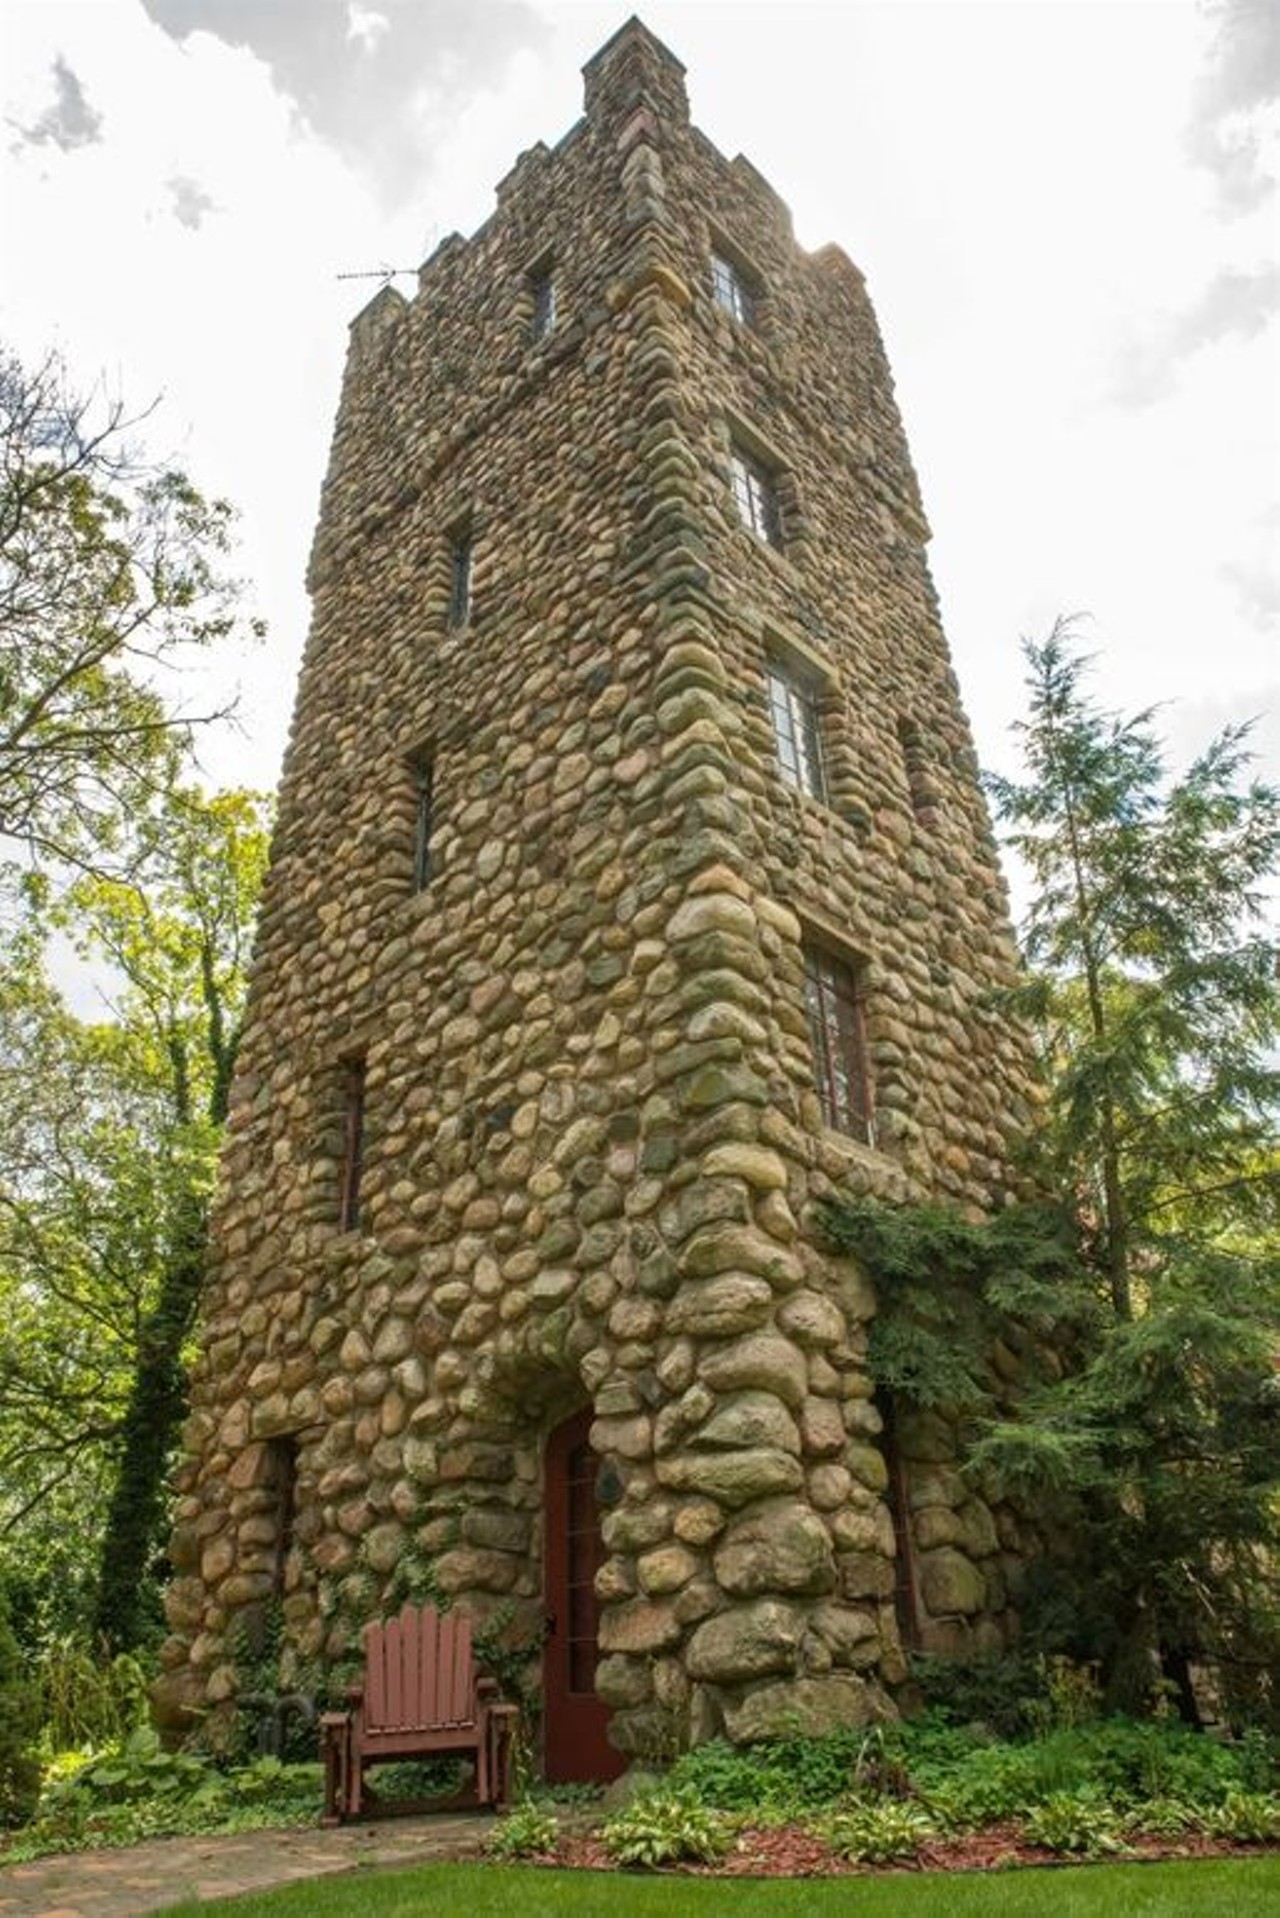 This majestic Michigan castle could be yours for $529k